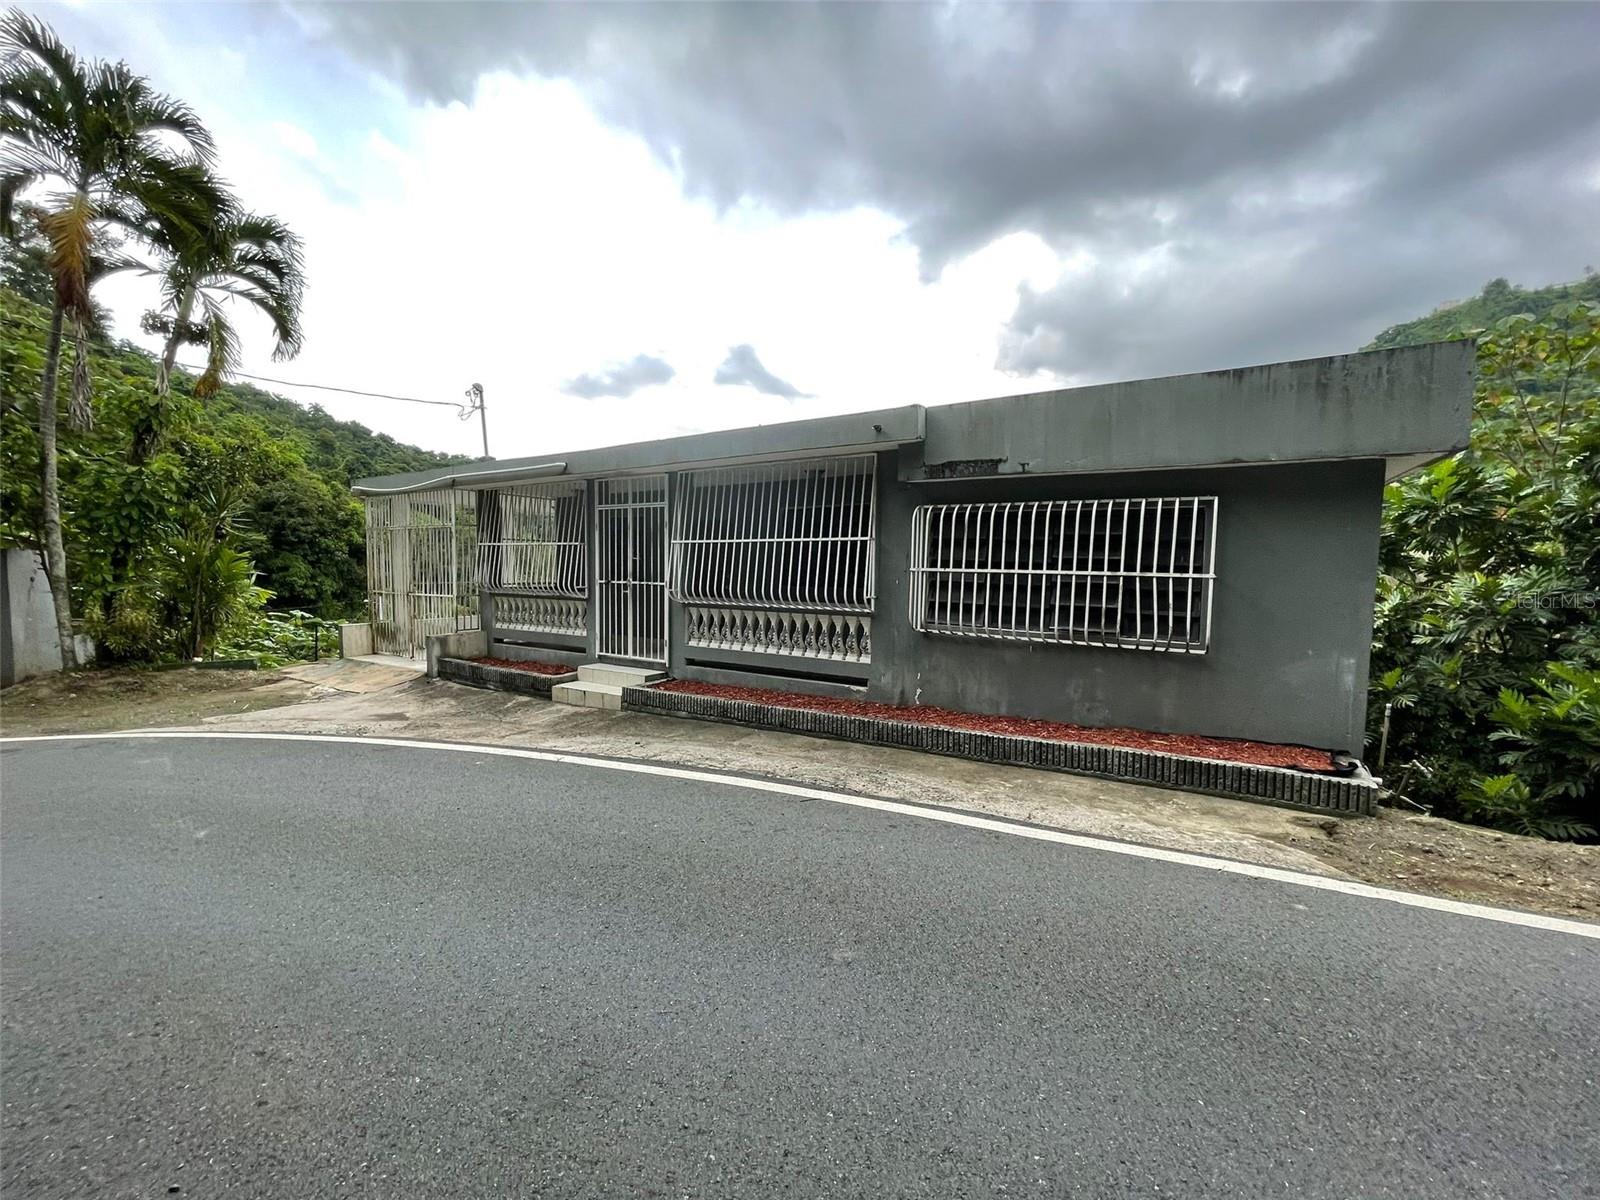 810 Km 1.0 ACHIOTE WARD, Naranjito, Puerto Rico 00719, 4 Bedrooms Bedrooms, ,1 BathroomBathrooms,Residential,For Sale,ACHIOTE WARD,PR9102892